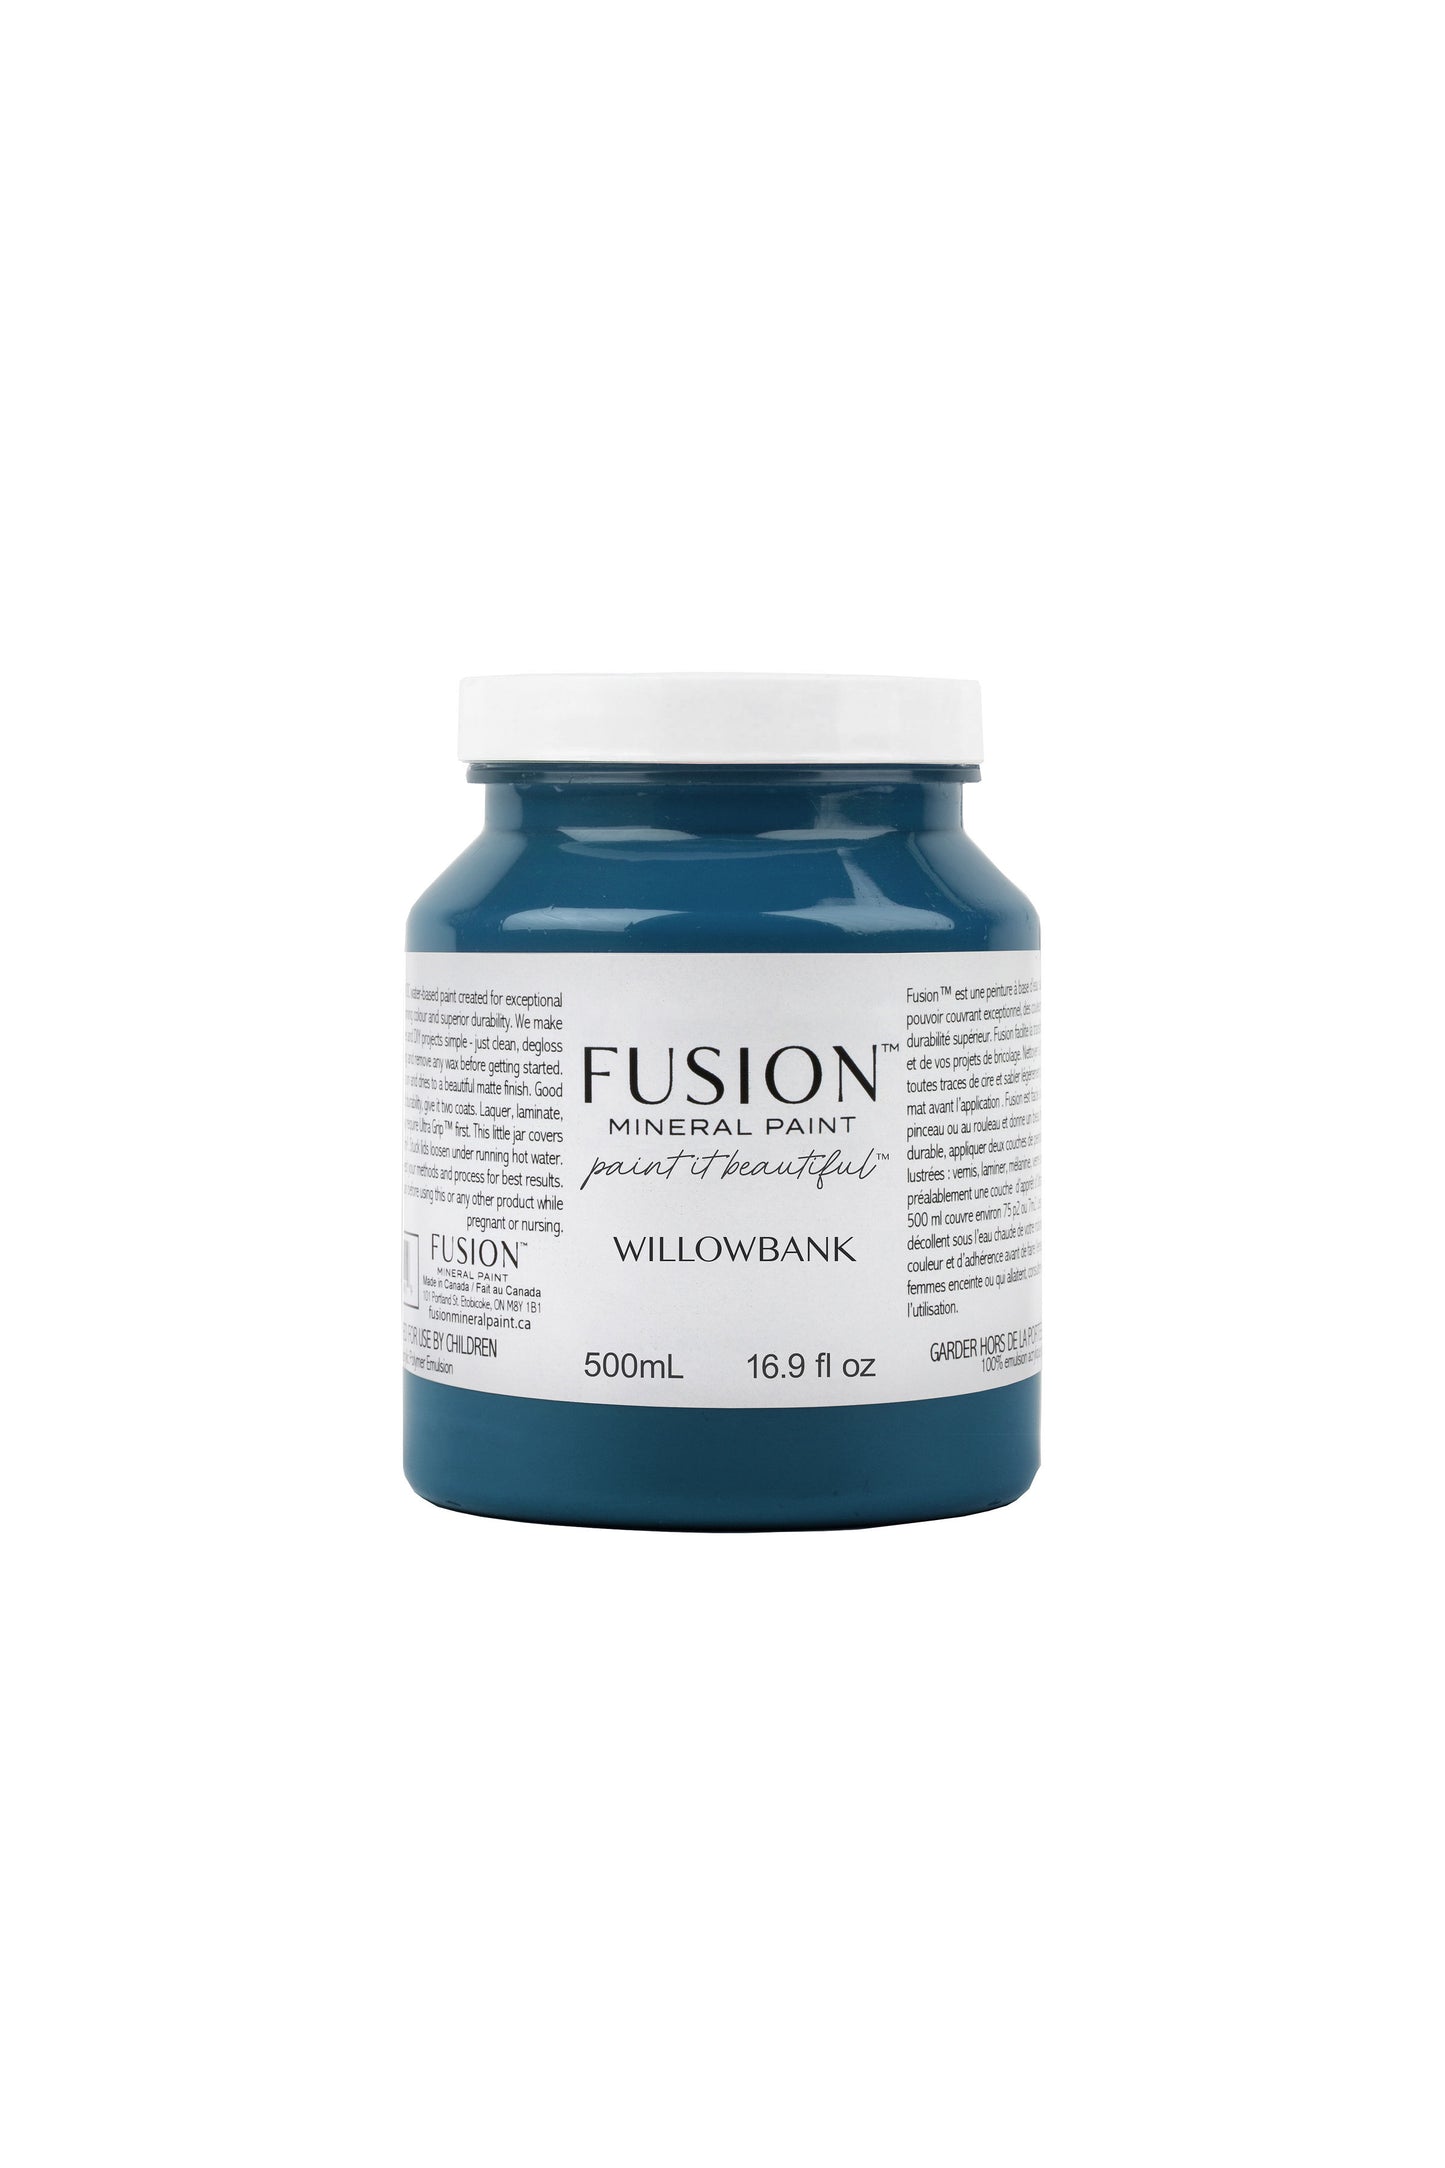 FUSION MINERAL PAINT- Willowbank